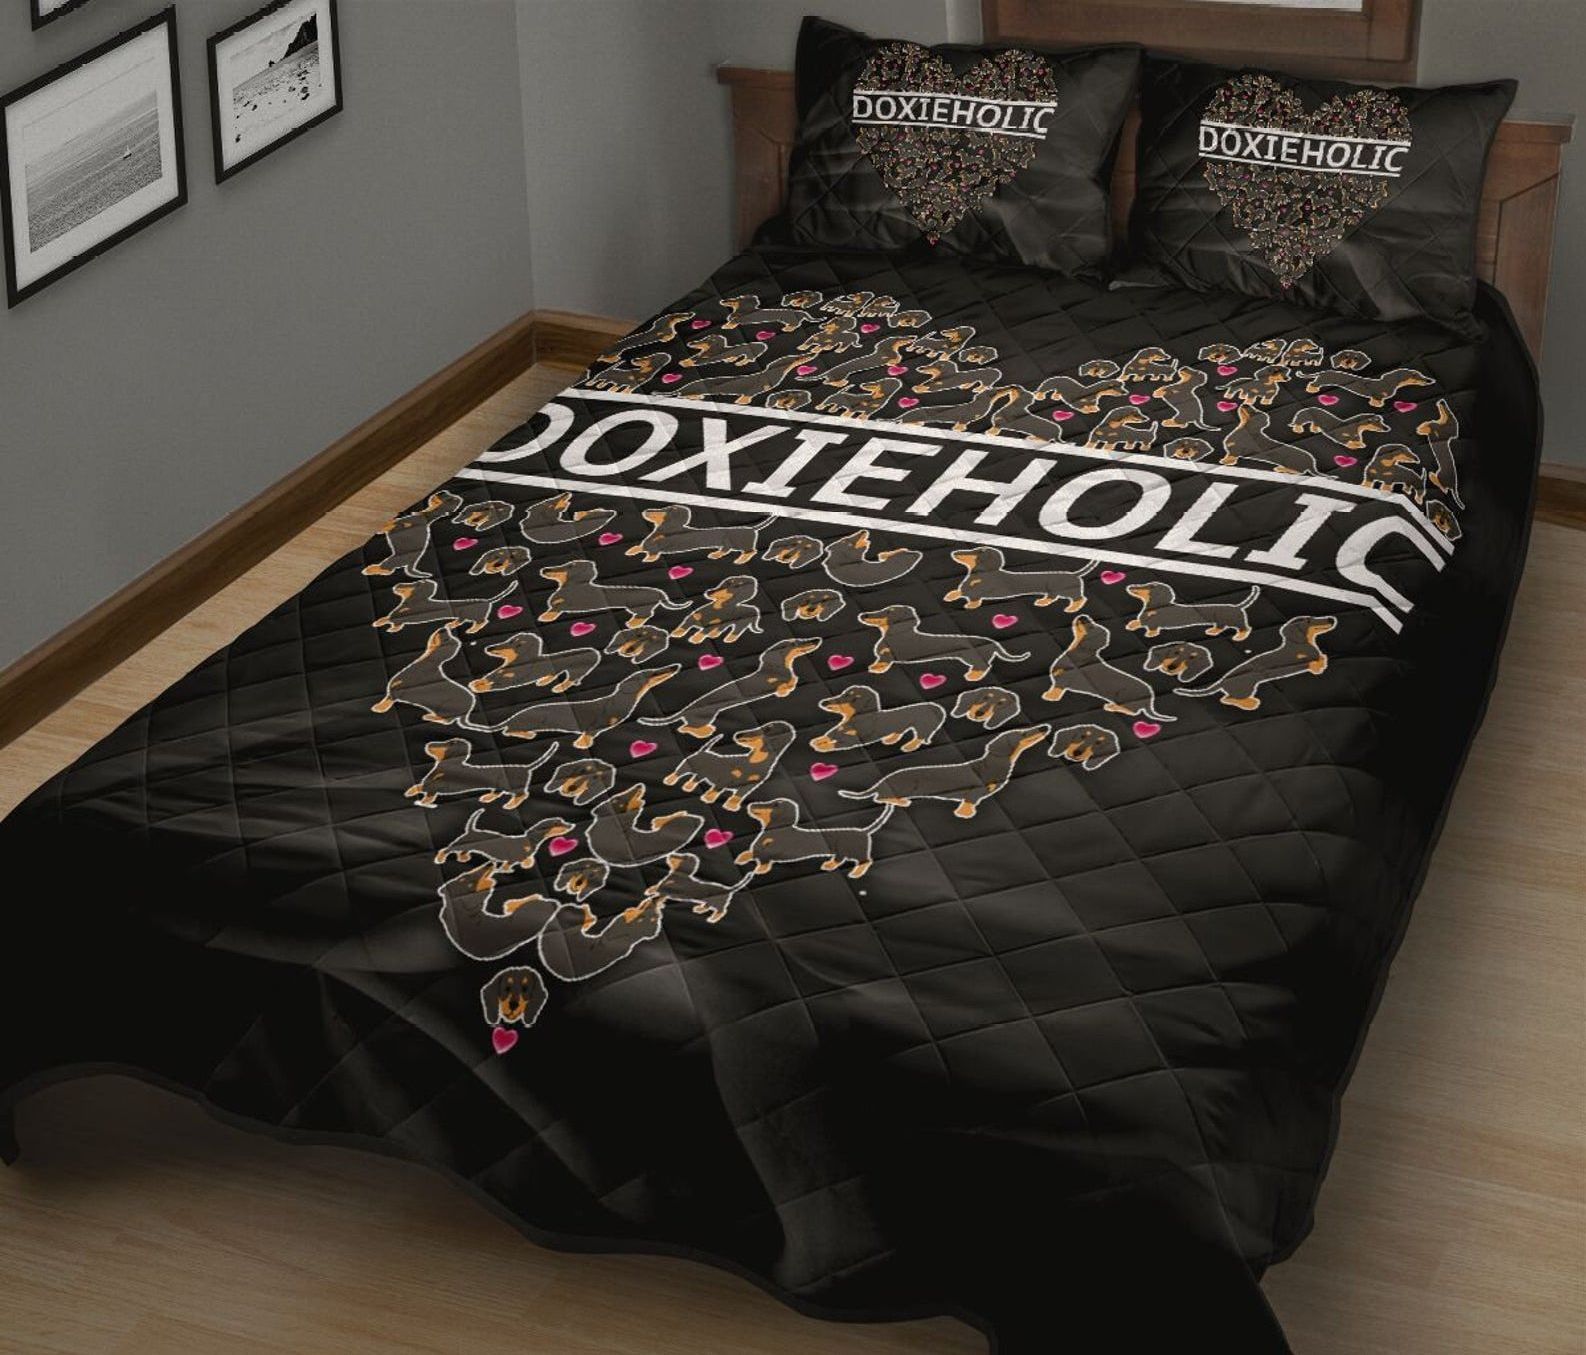 Dachshund Doxieholic Quilt Bedding Set Cotton Bed Sheets Spread Comforter Duvet Cover Bedding Sets